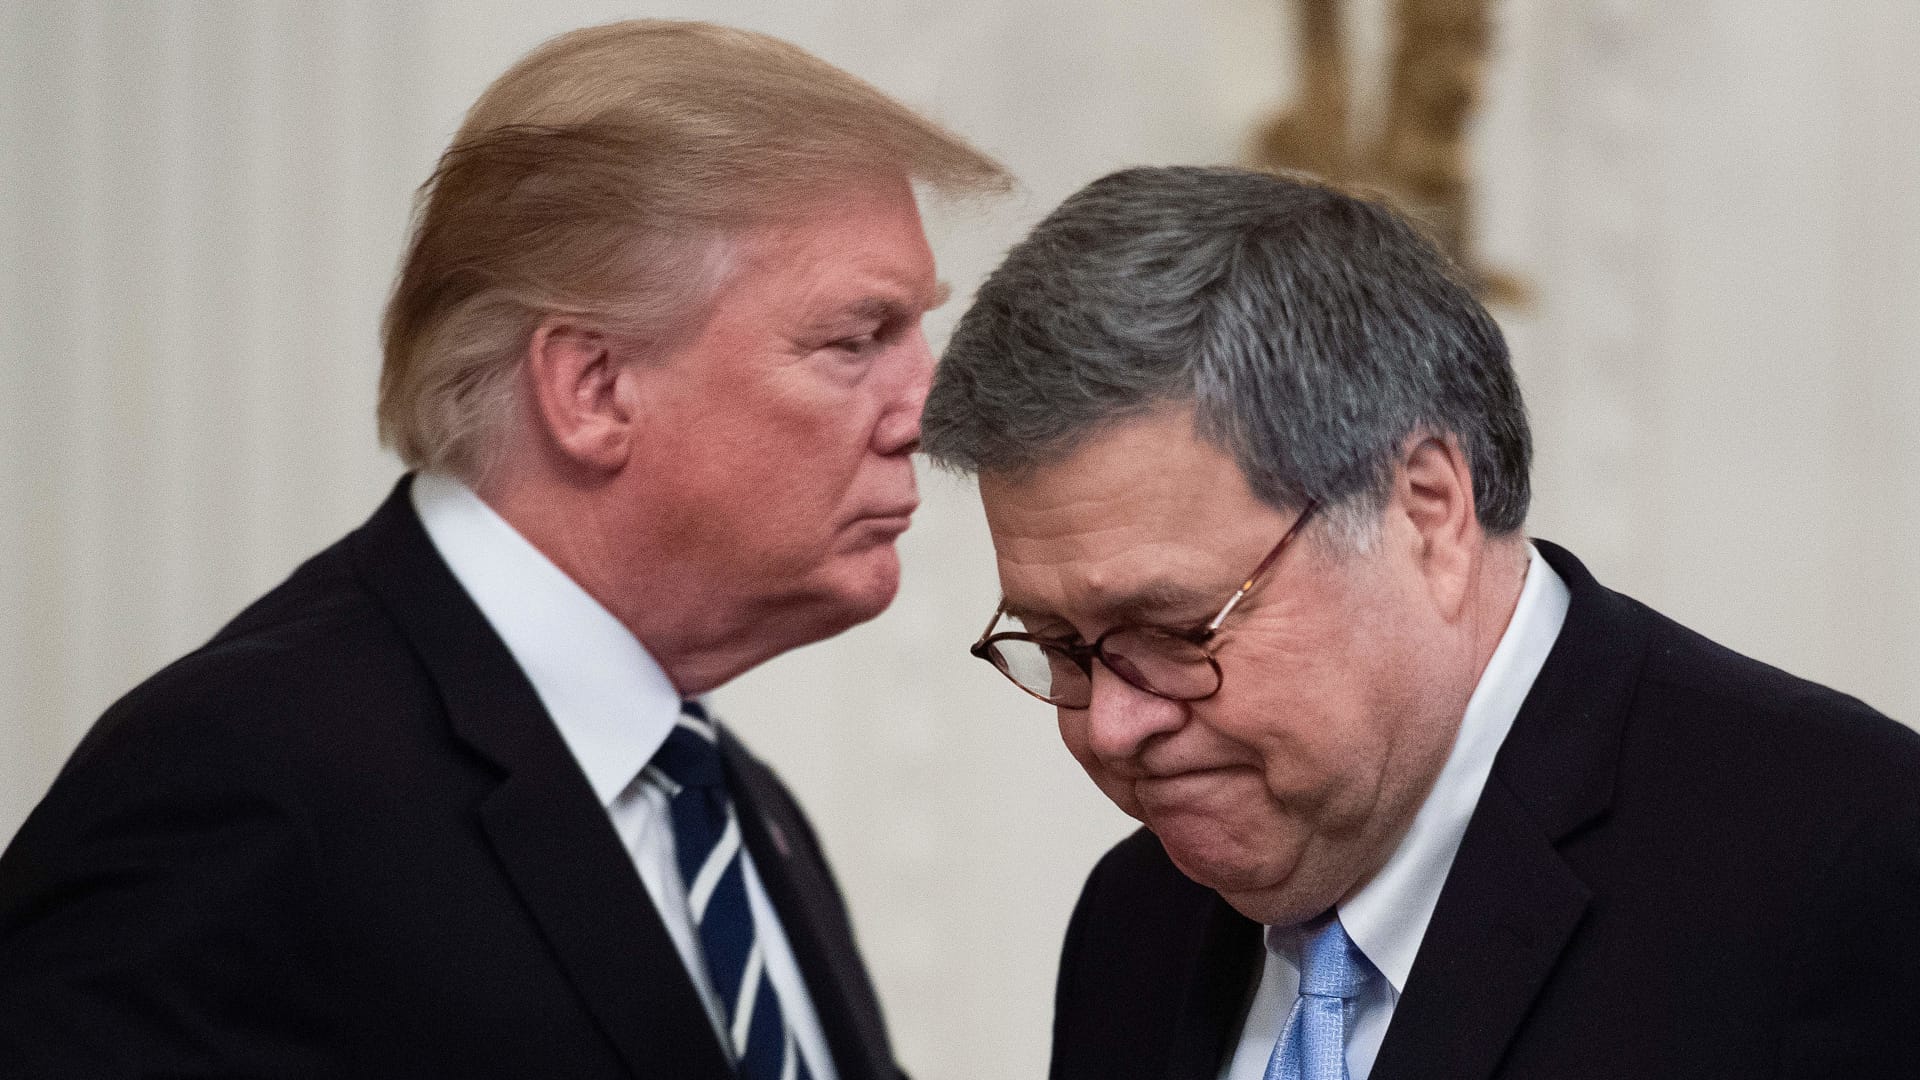 US President Donald Trump (L) shakes hands with US Attorney General William Barr (R) during the Public Safety Officer Medal of Valor presentation ceremony at the White House in Washington, DC on May 22, 2019.